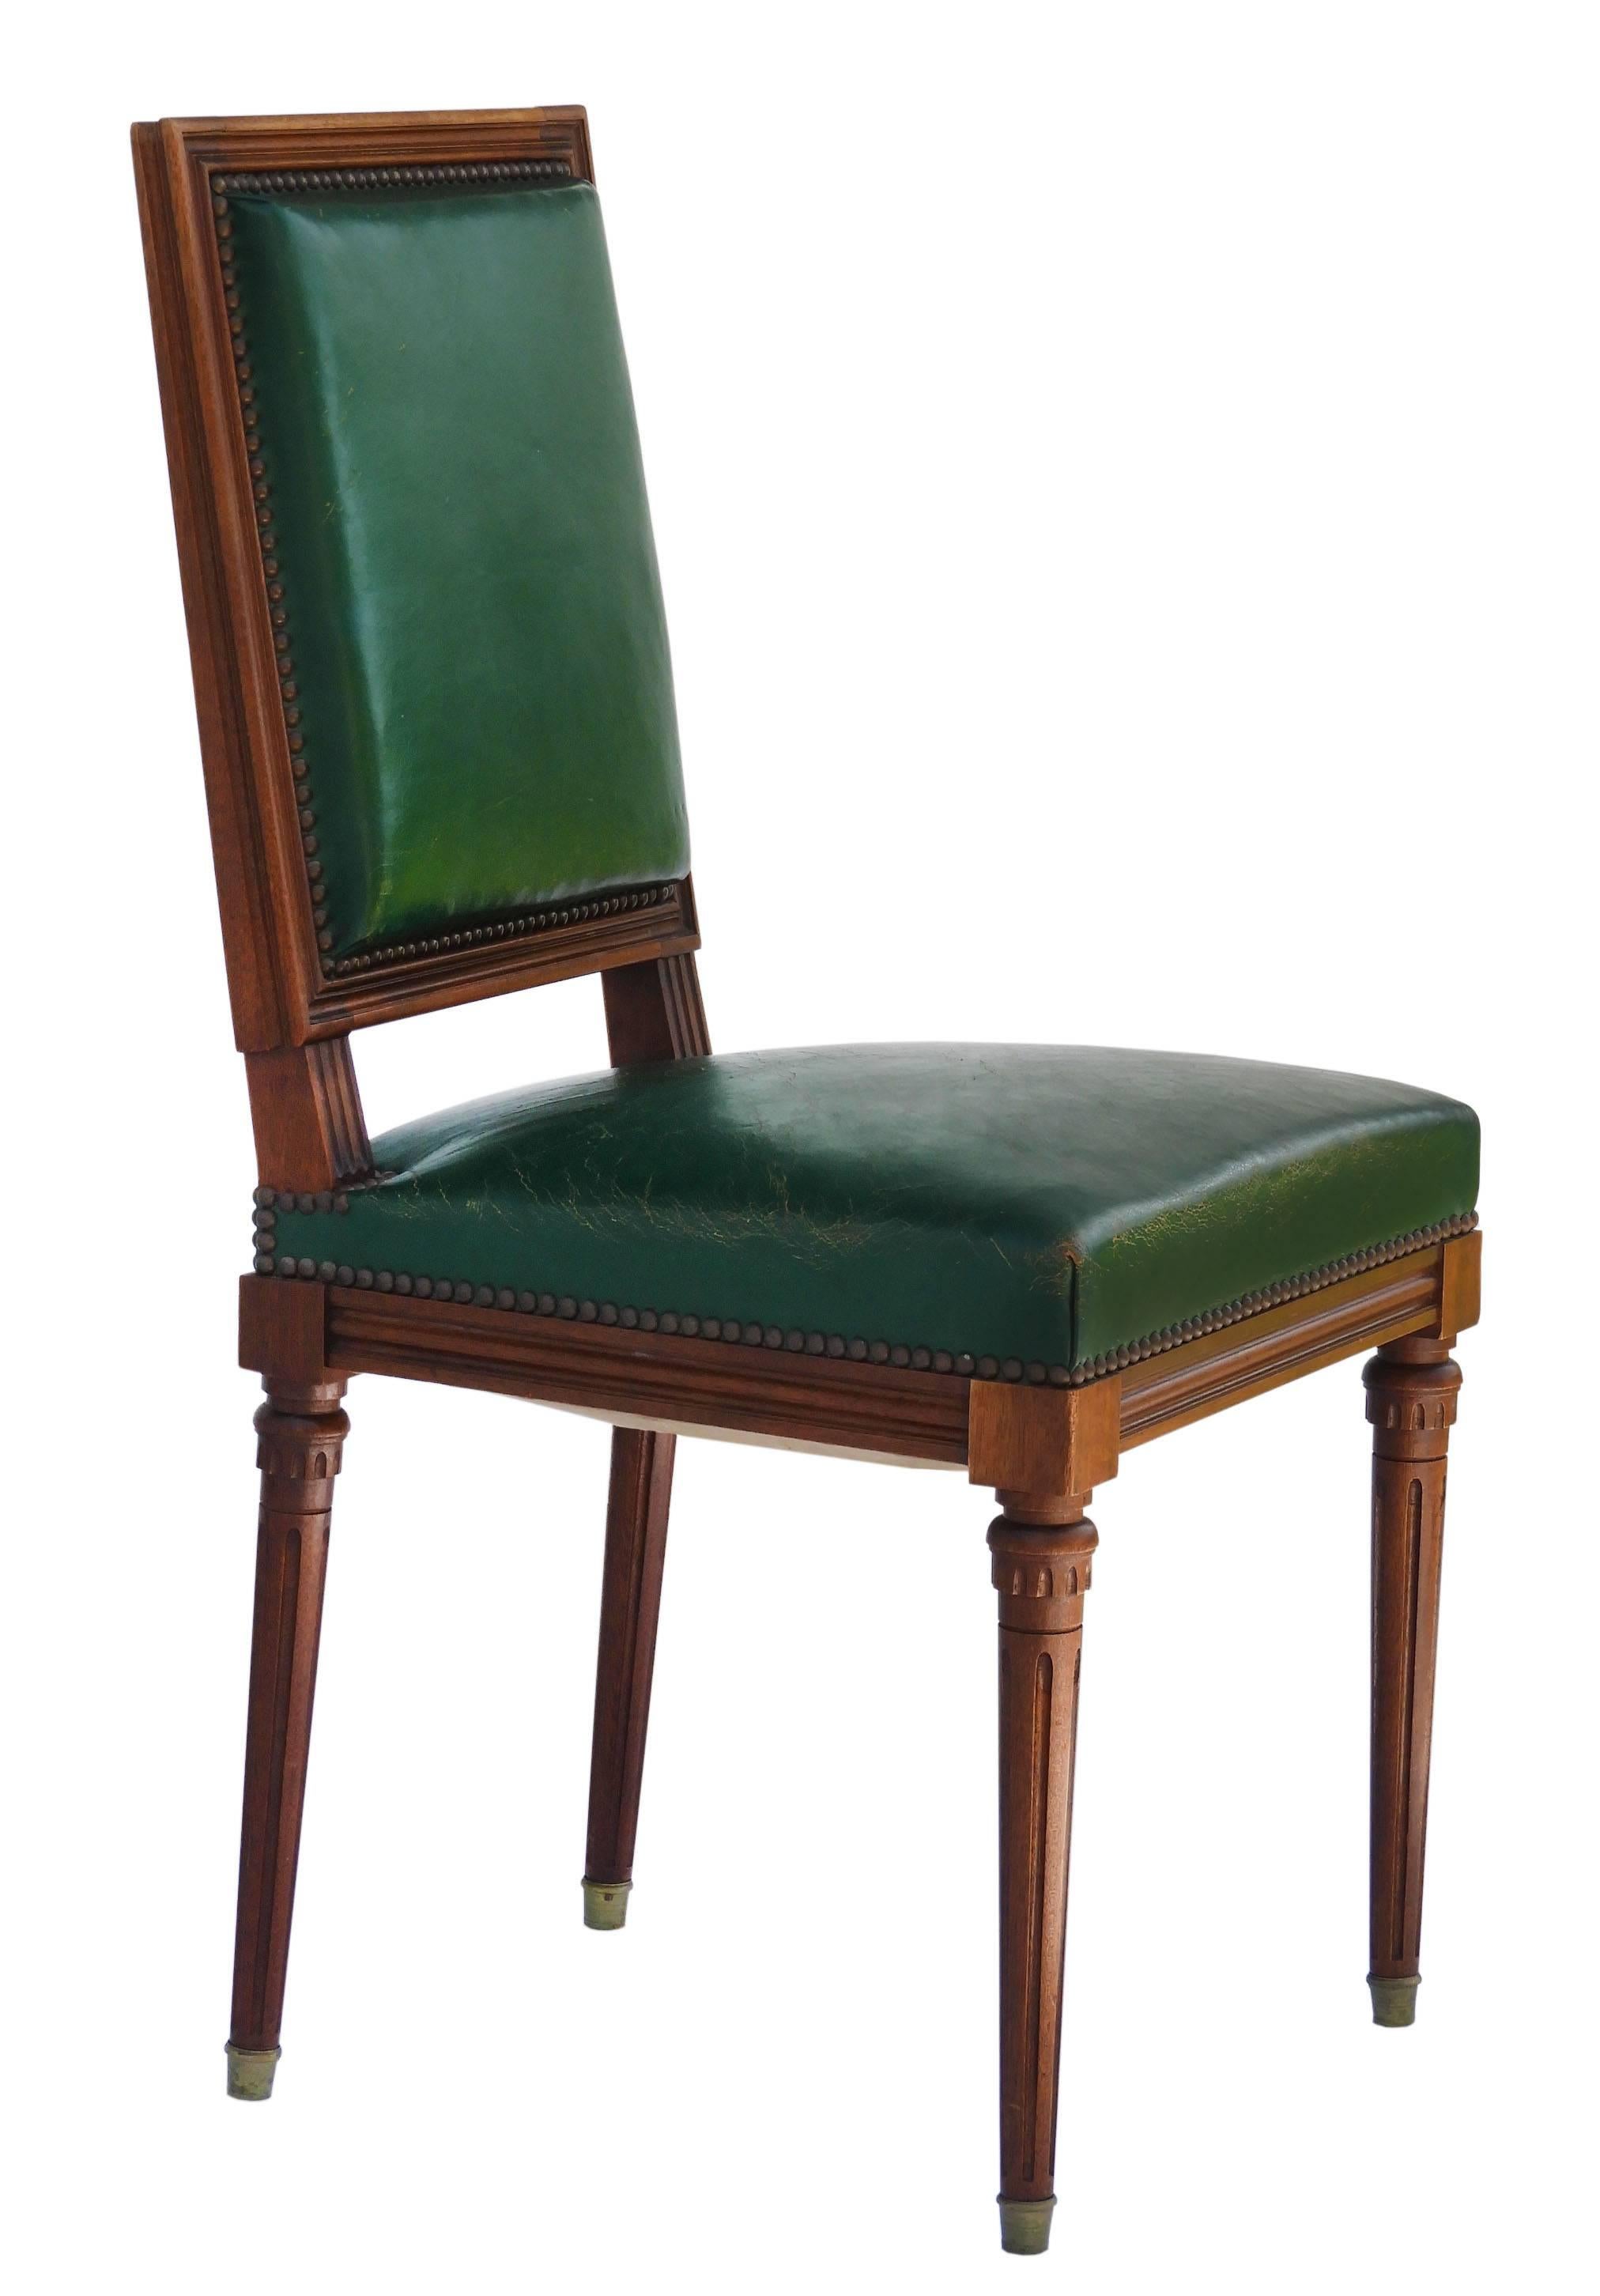 Set of six French dining chairs, early 20th century Louis XVI revival original dark green studded upholstery.
In good condition solid and sound with worn leather good patina and very comfortable
Some marks of use and one small loss to the wood at